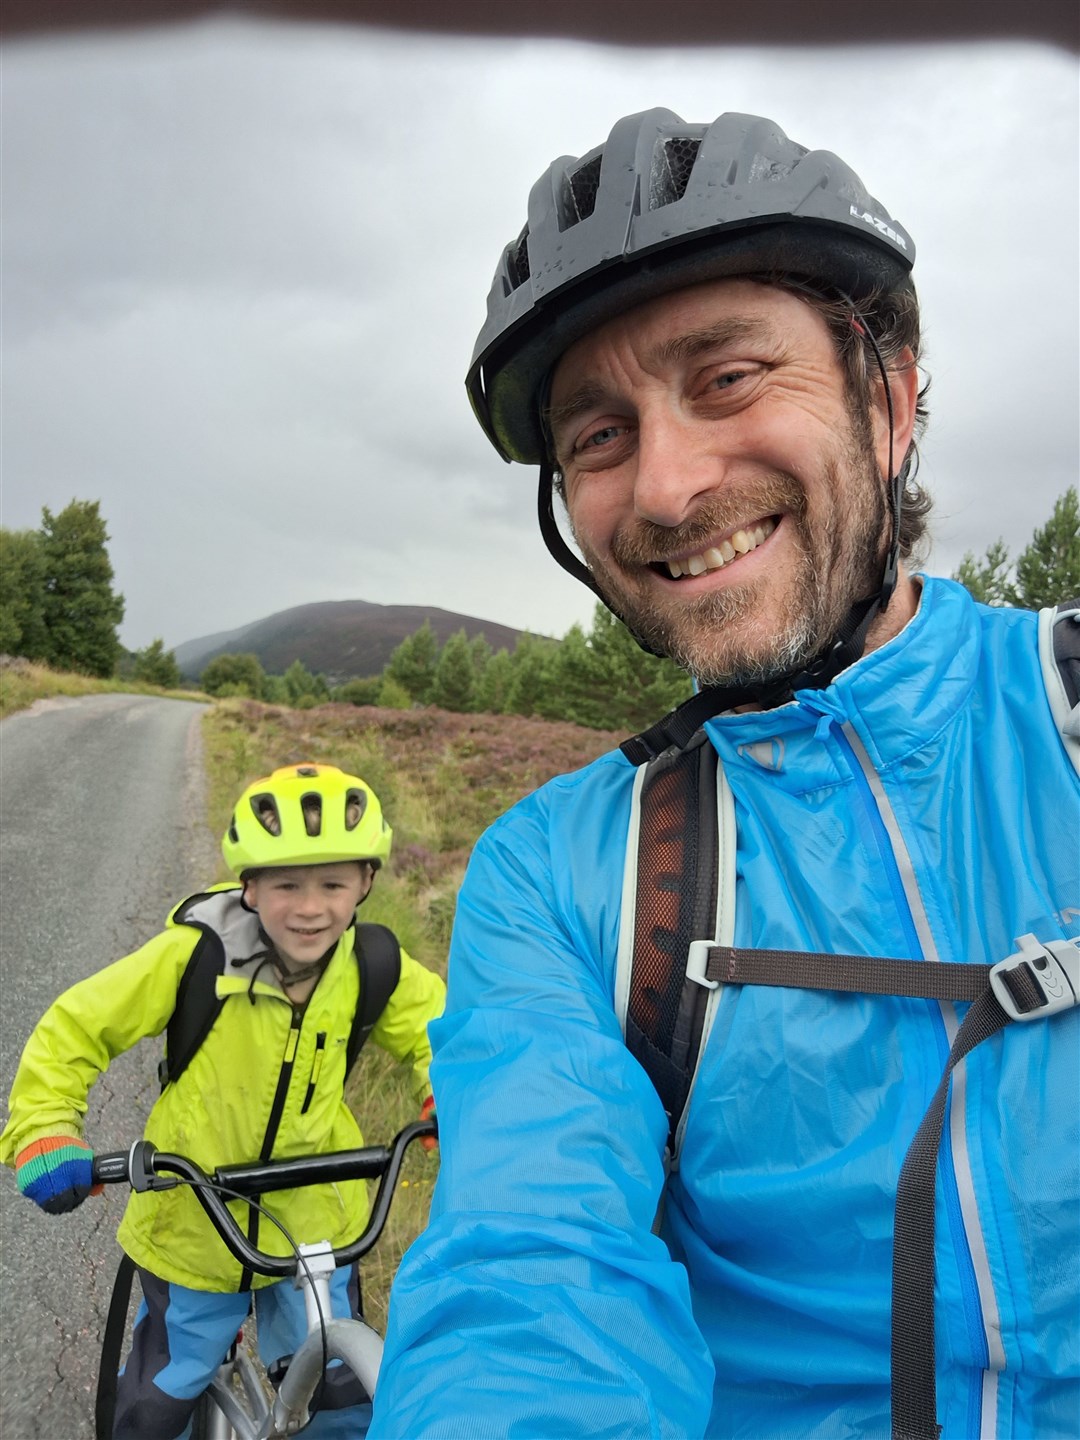 John and Matthew on a memorable biking trip in the Cairngorms.